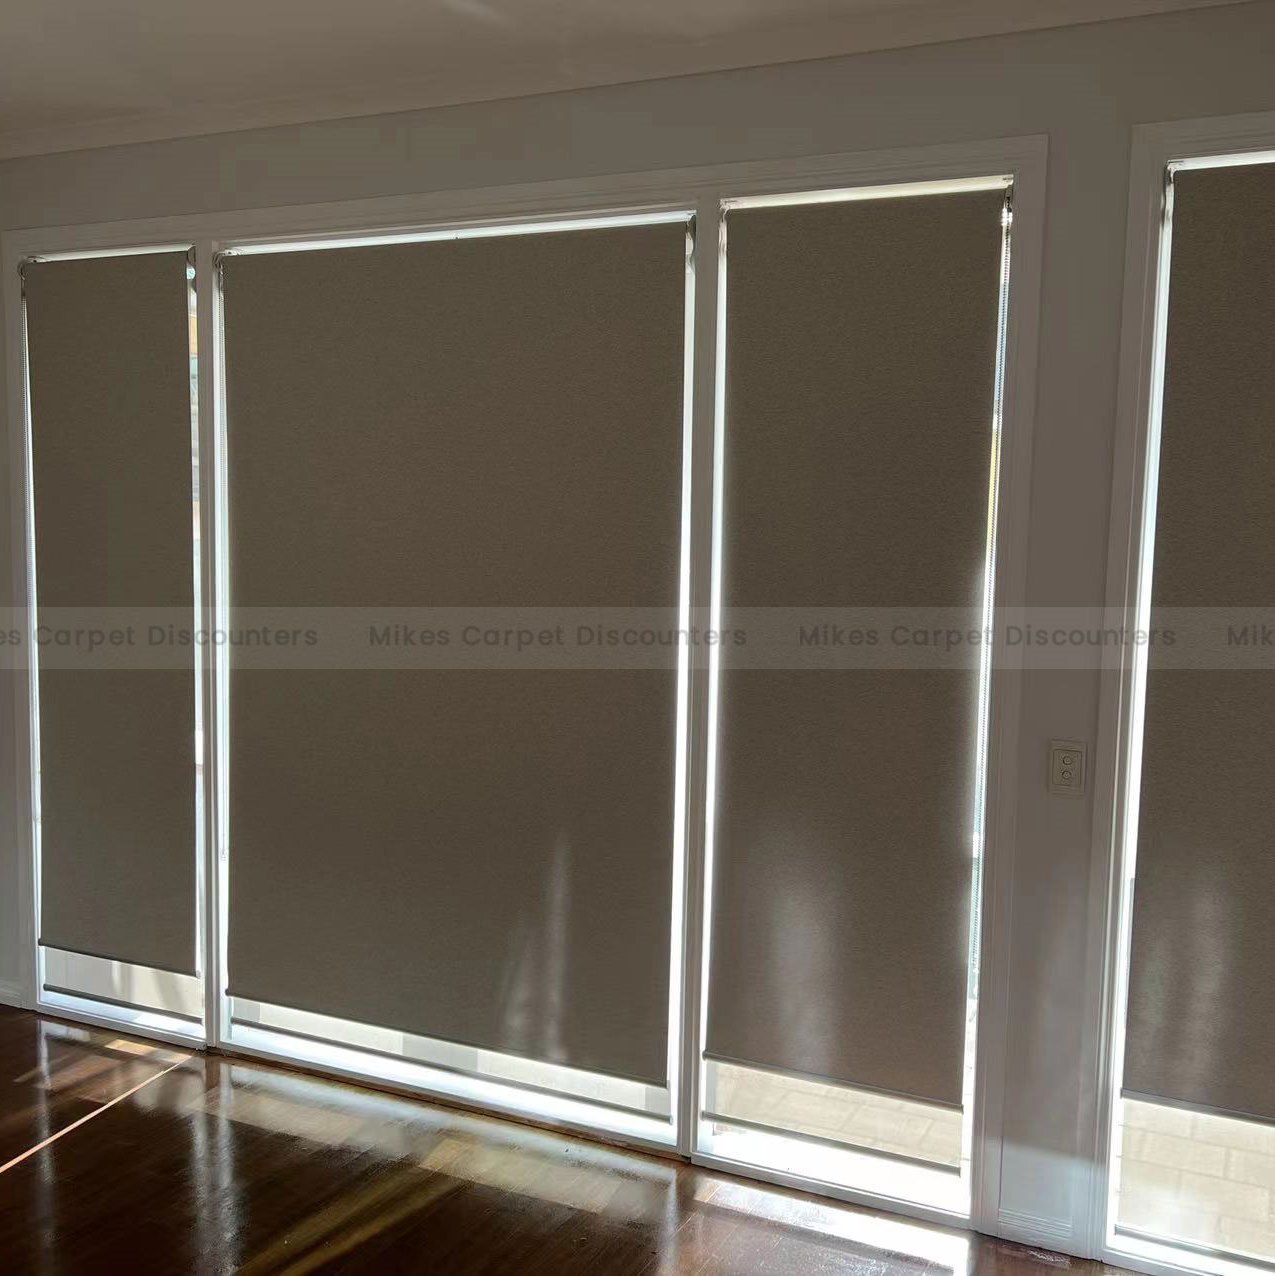 https://www.mikescarpets.com.au/wp-content/uploads/2022/06/Mikes-Window-Covering-Work-2.jpg